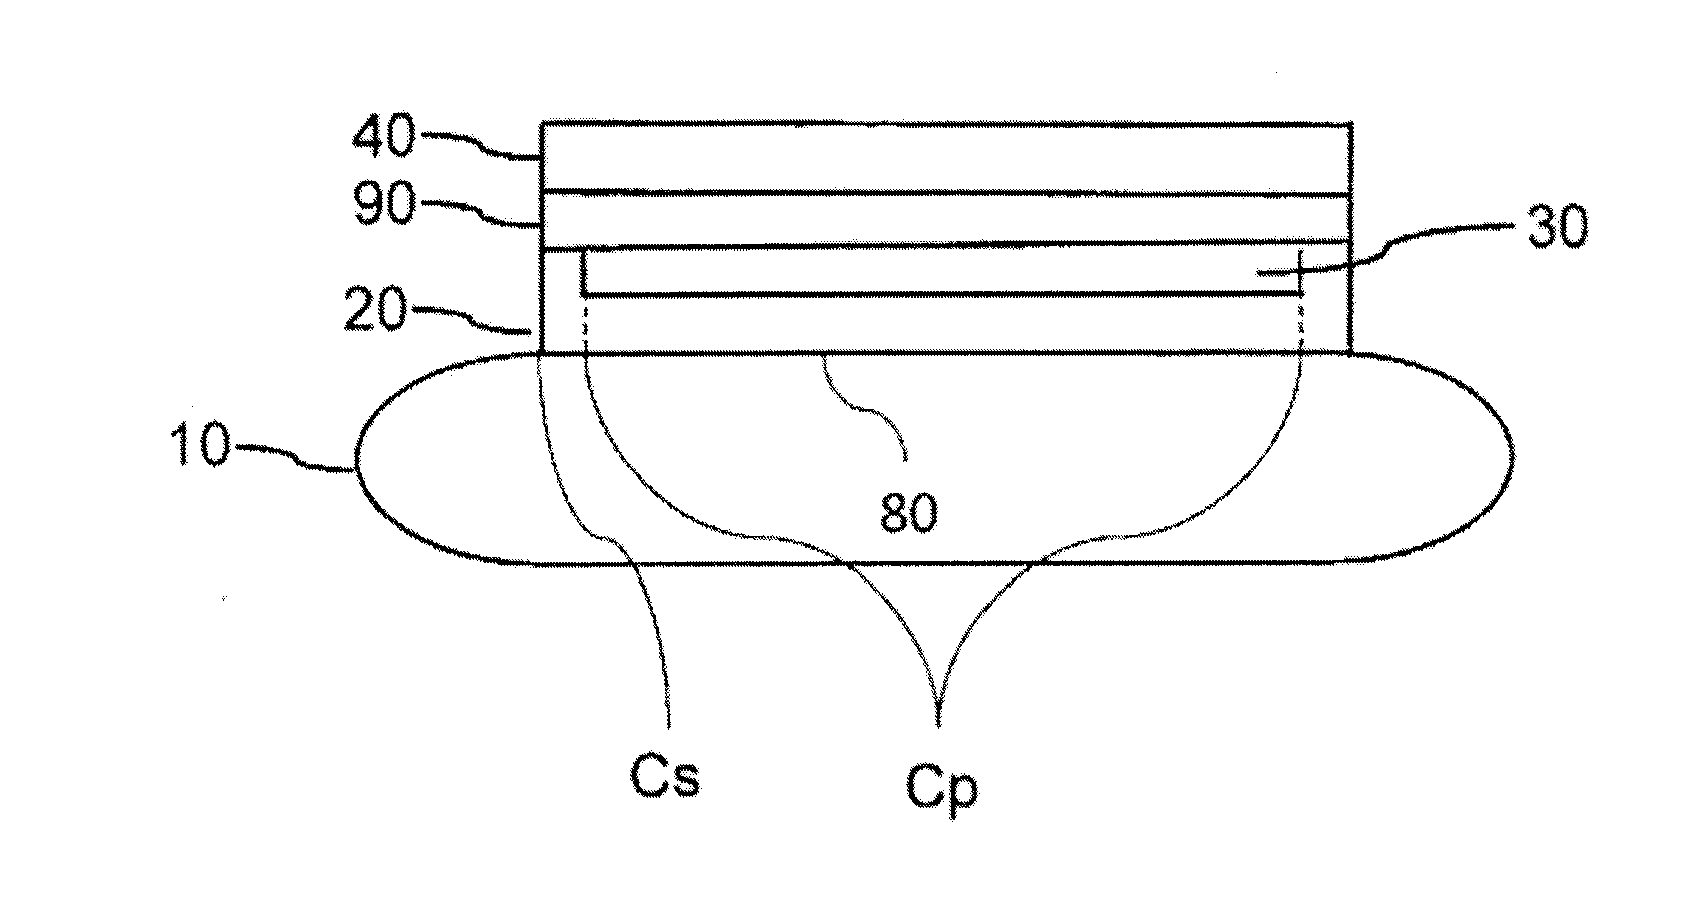 Process for manufacturing a composite structure